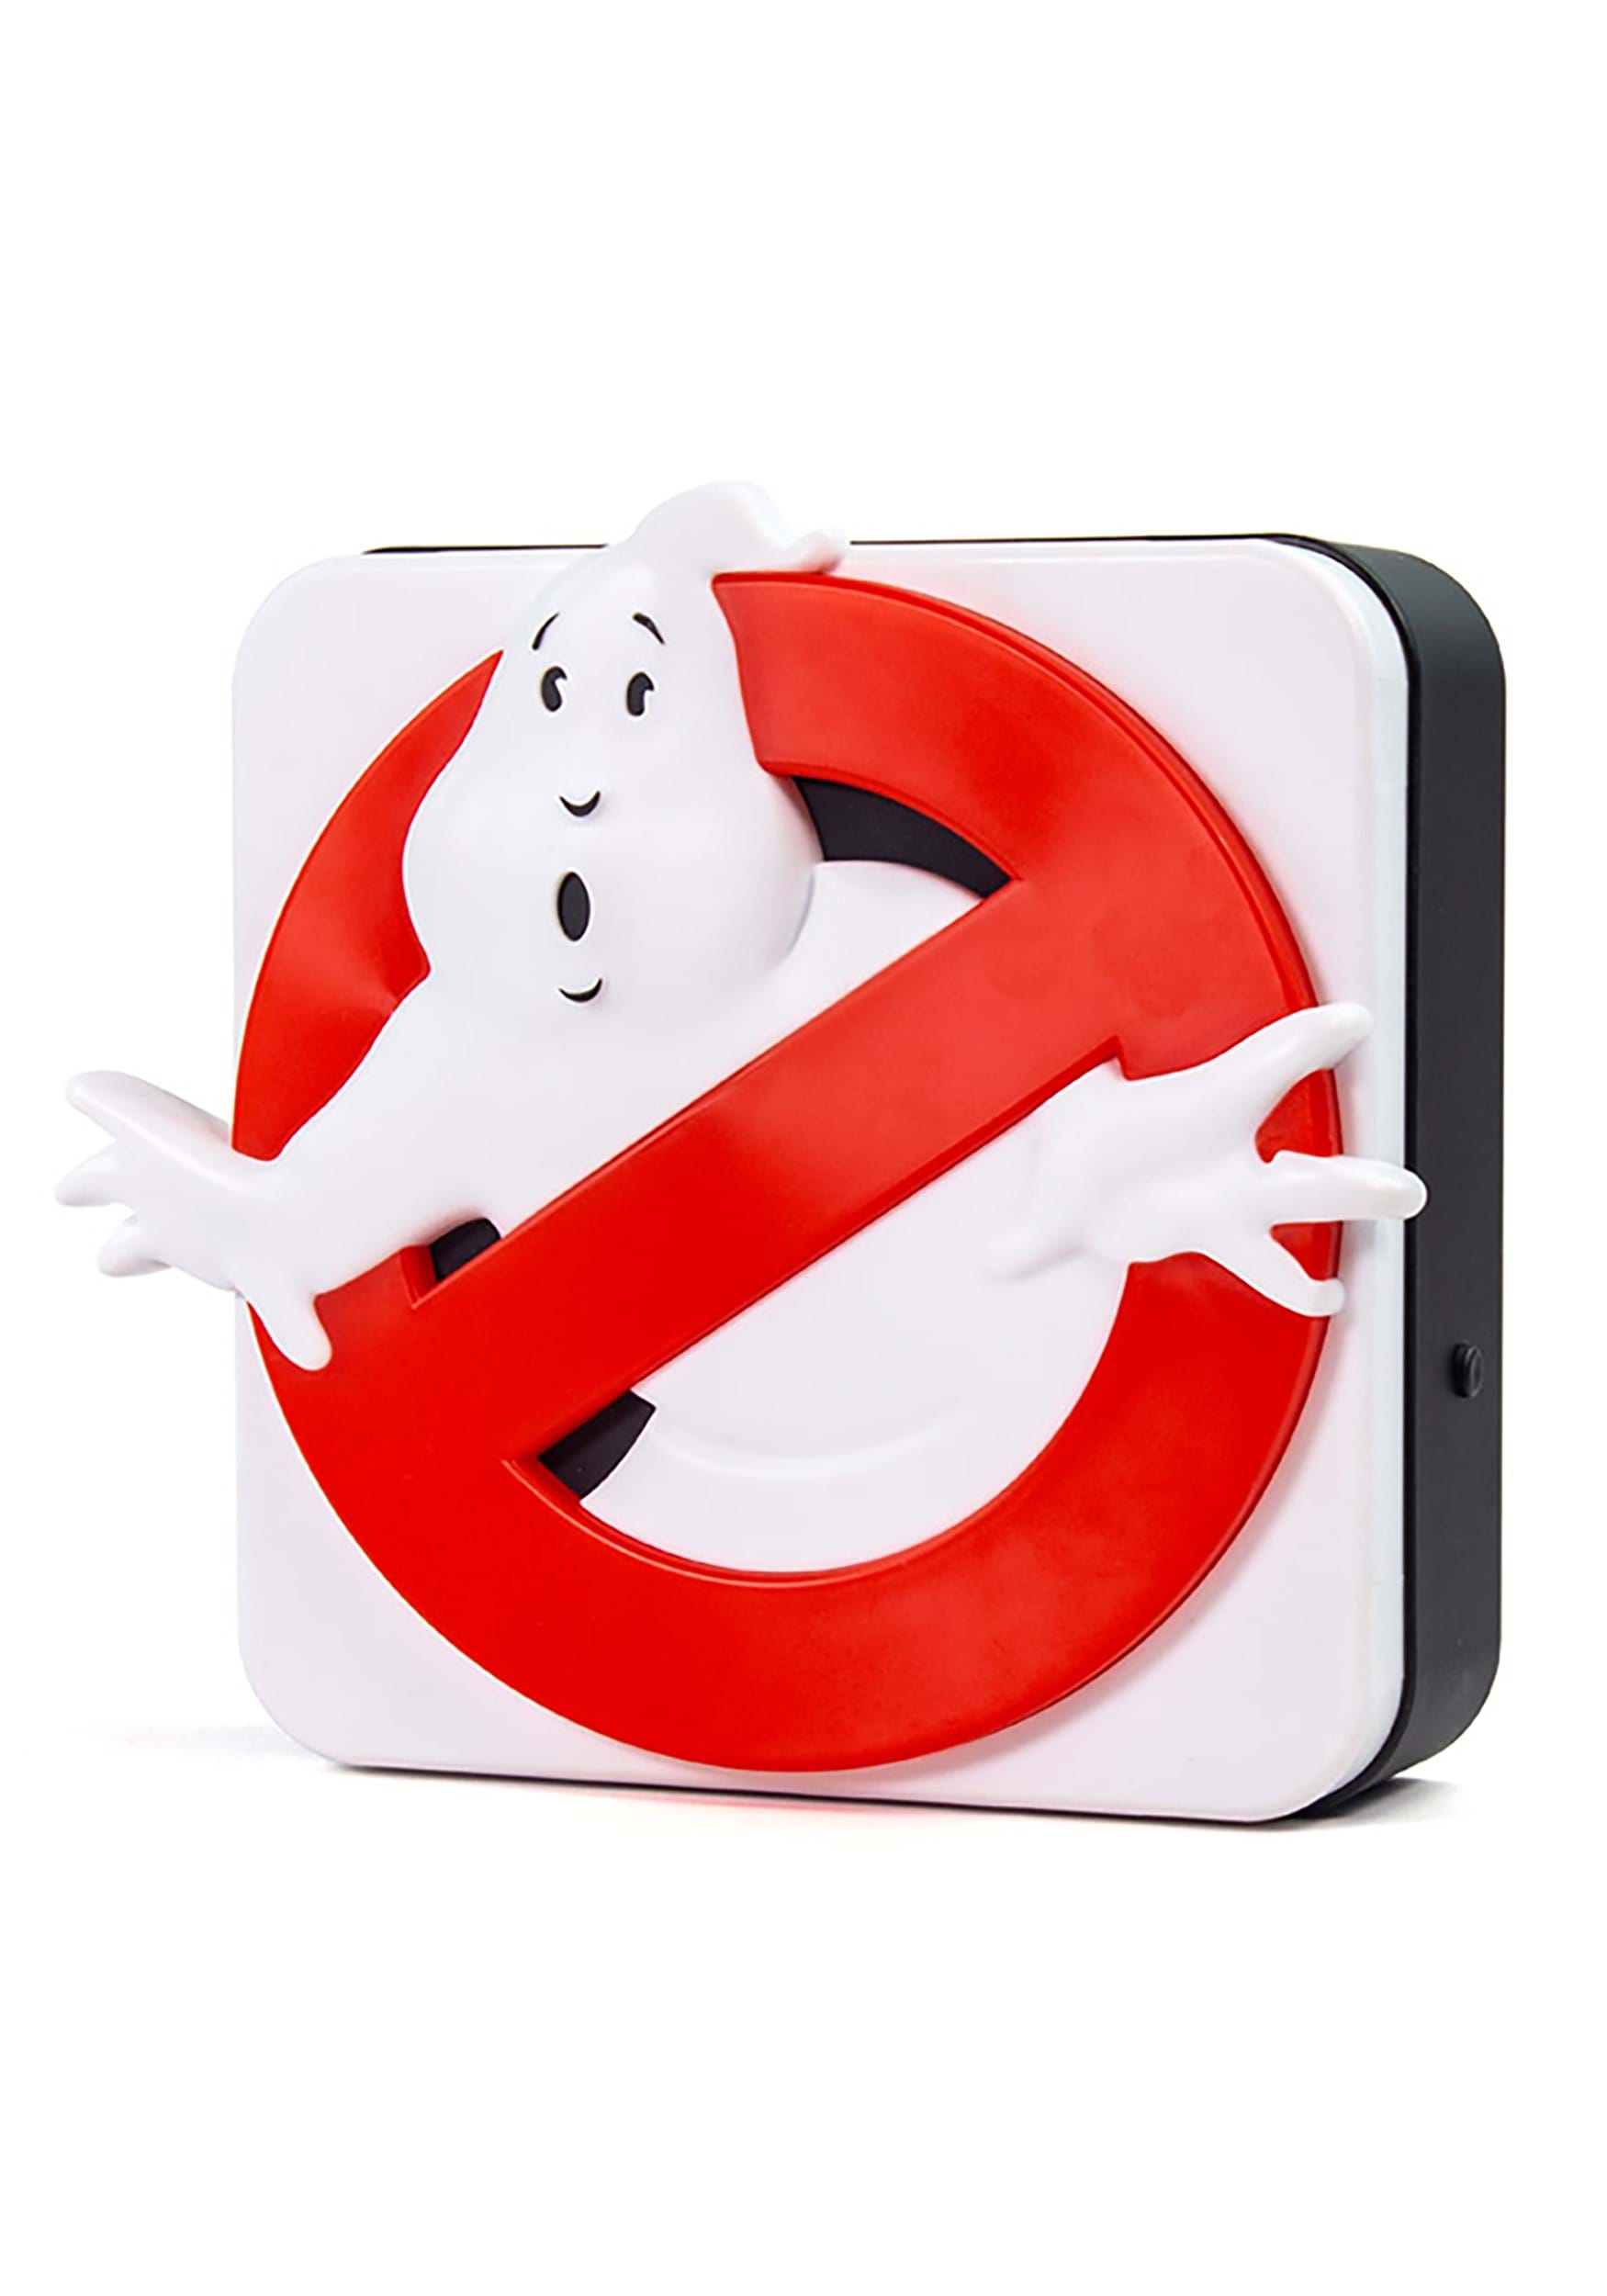 Official 3D Ghostbusters Desk/Wall Light